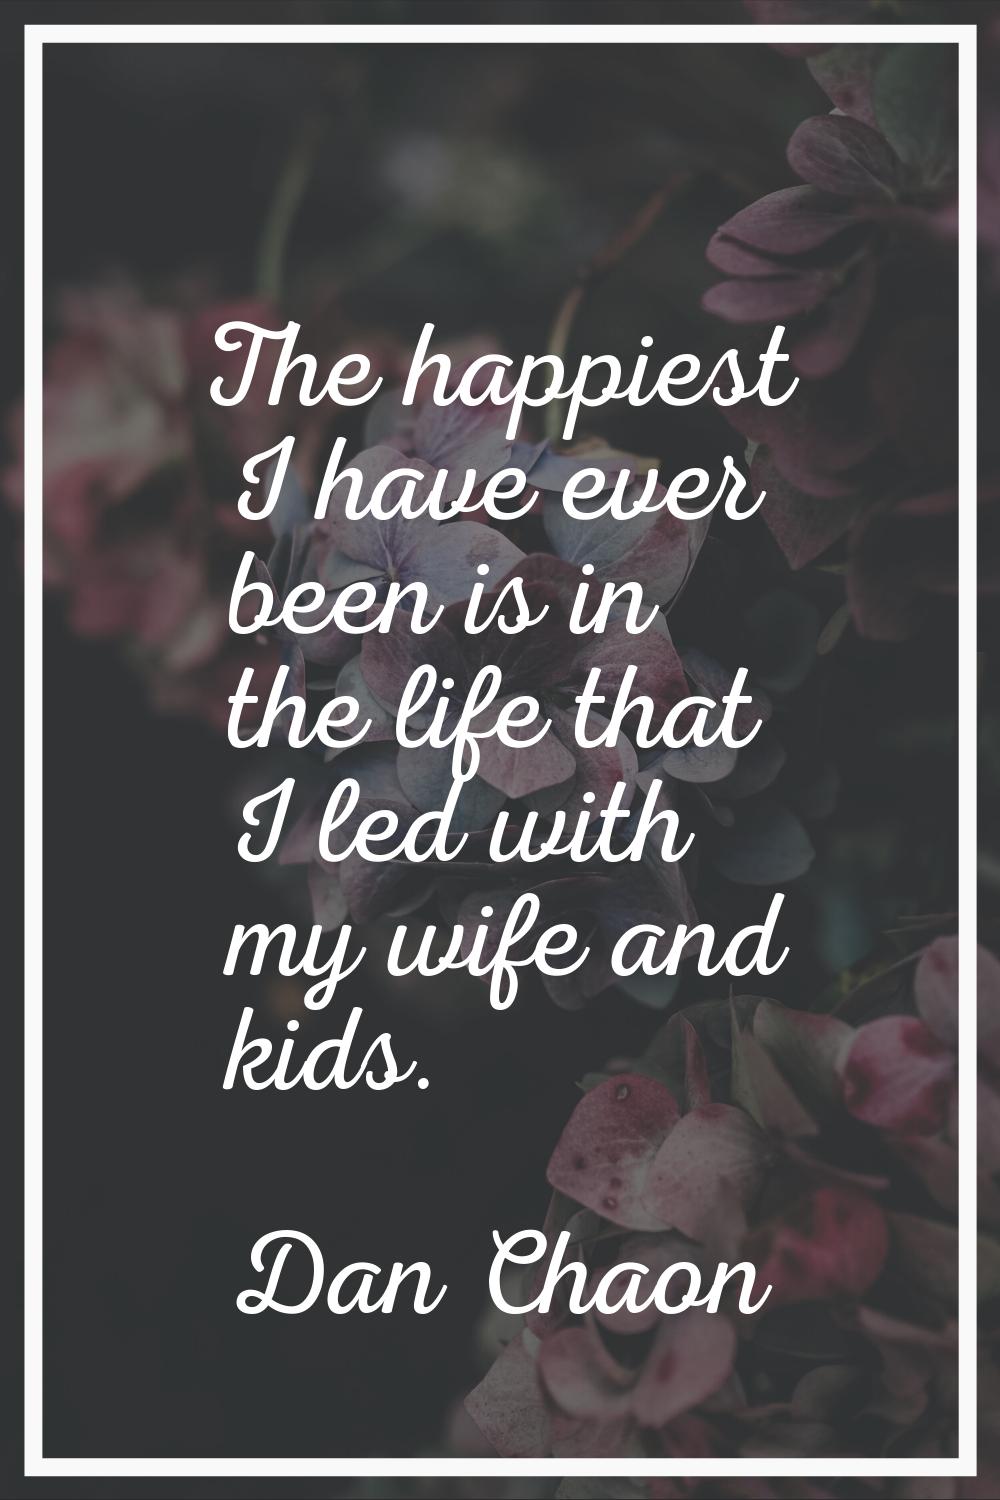 The happiest I have ever been is in the life that I led with my wife and kids.